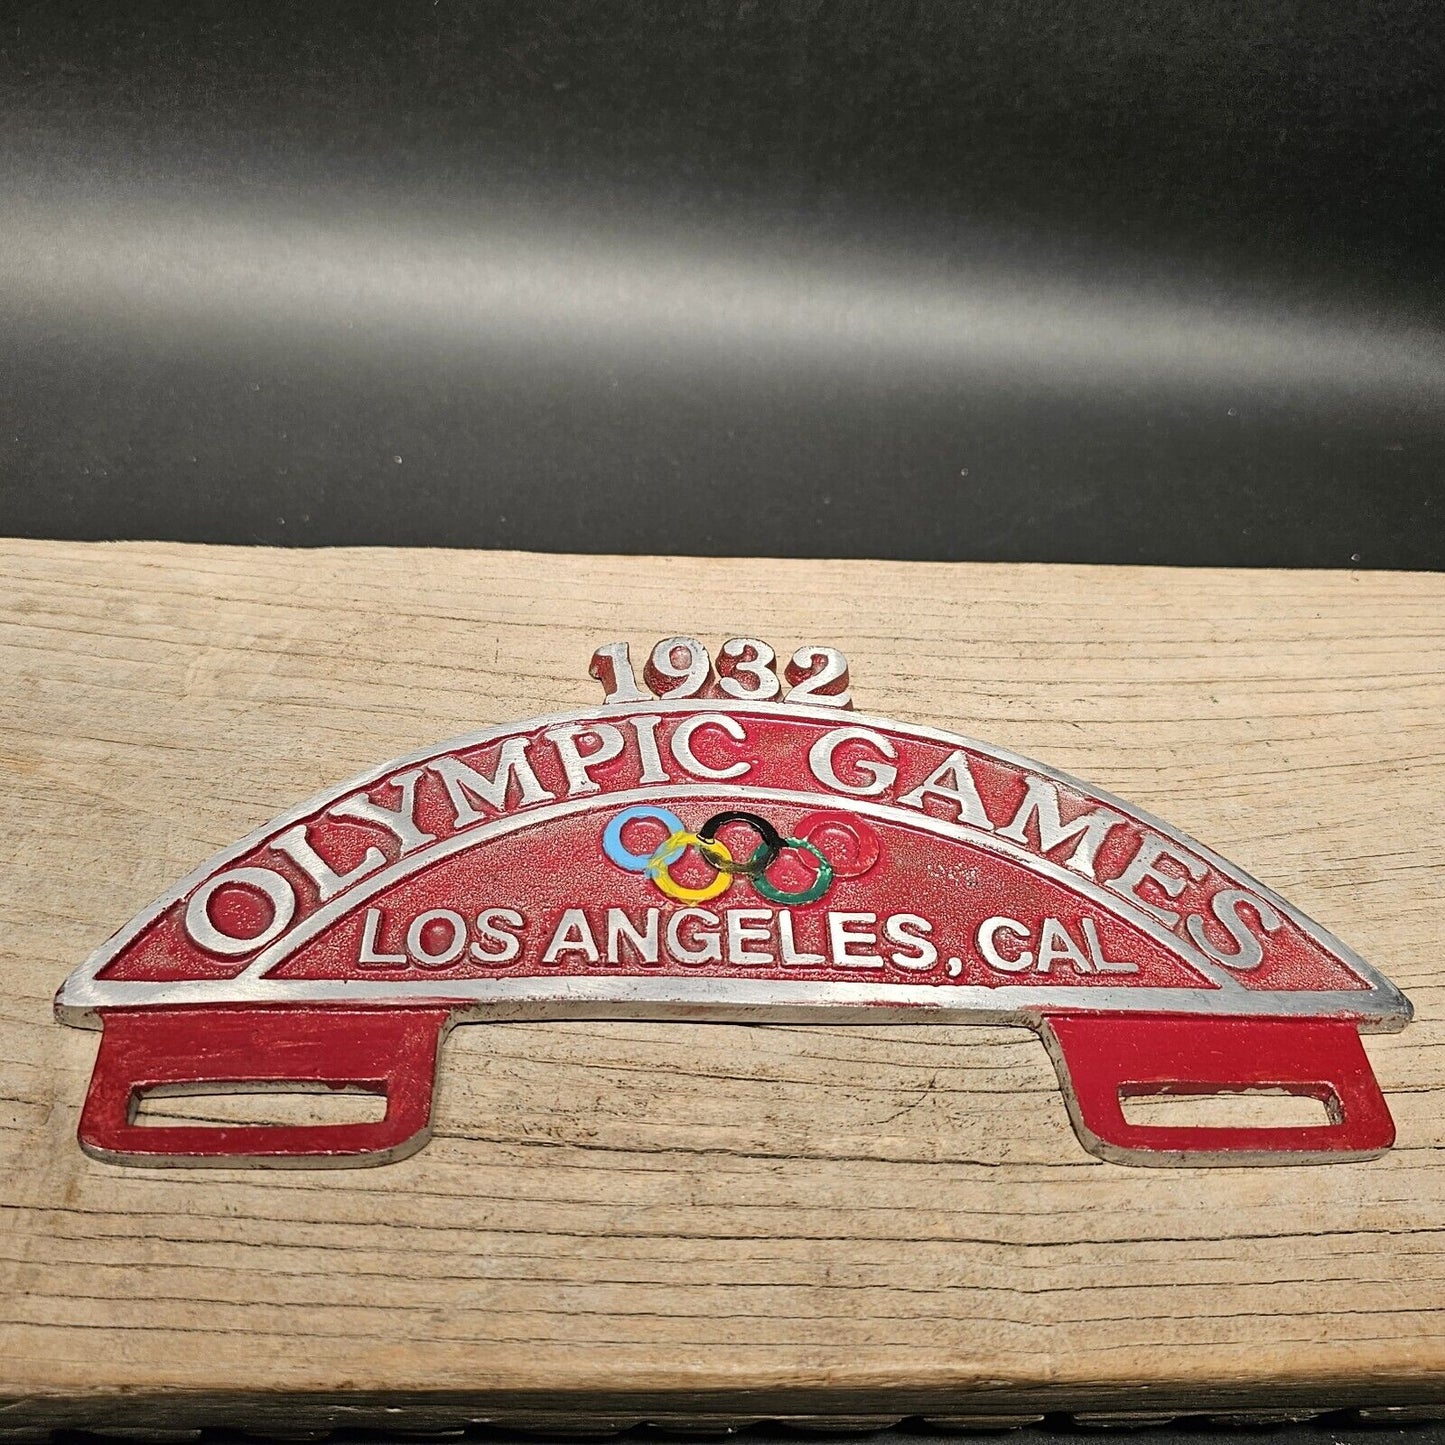 Vintage Style Aluminum 1932 Olympic Games License Plate Fob Topper